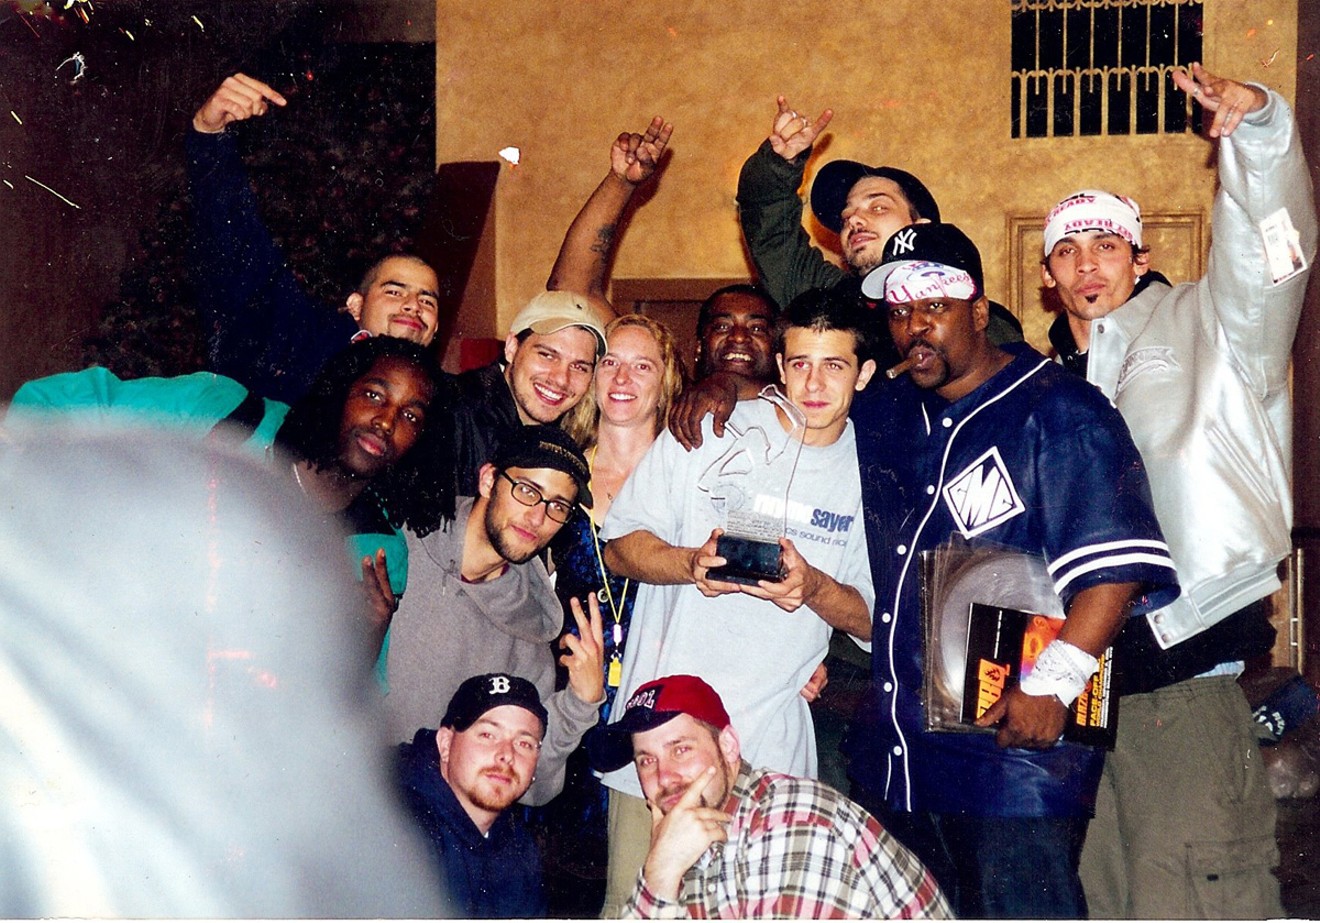 Michael "Eyedea" Larson (middle, white shirt) with some of the Rhymesayers crew.